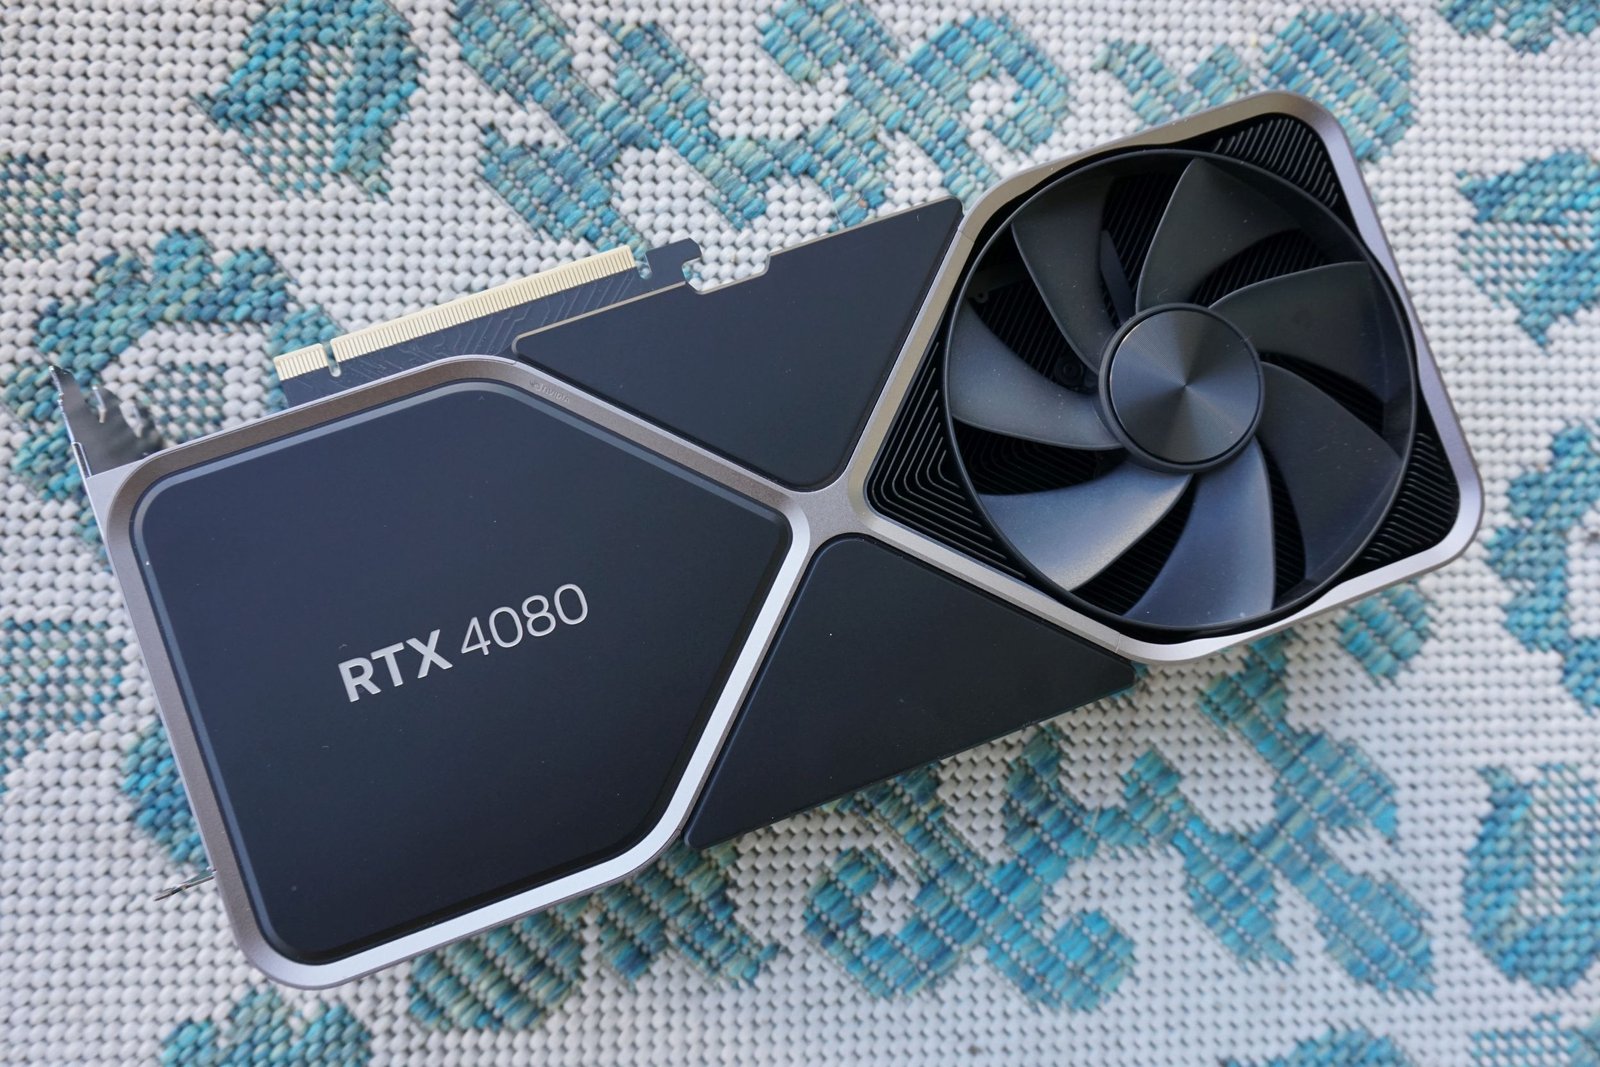 Even scalpers don’t desire the GeForce RTX 4080